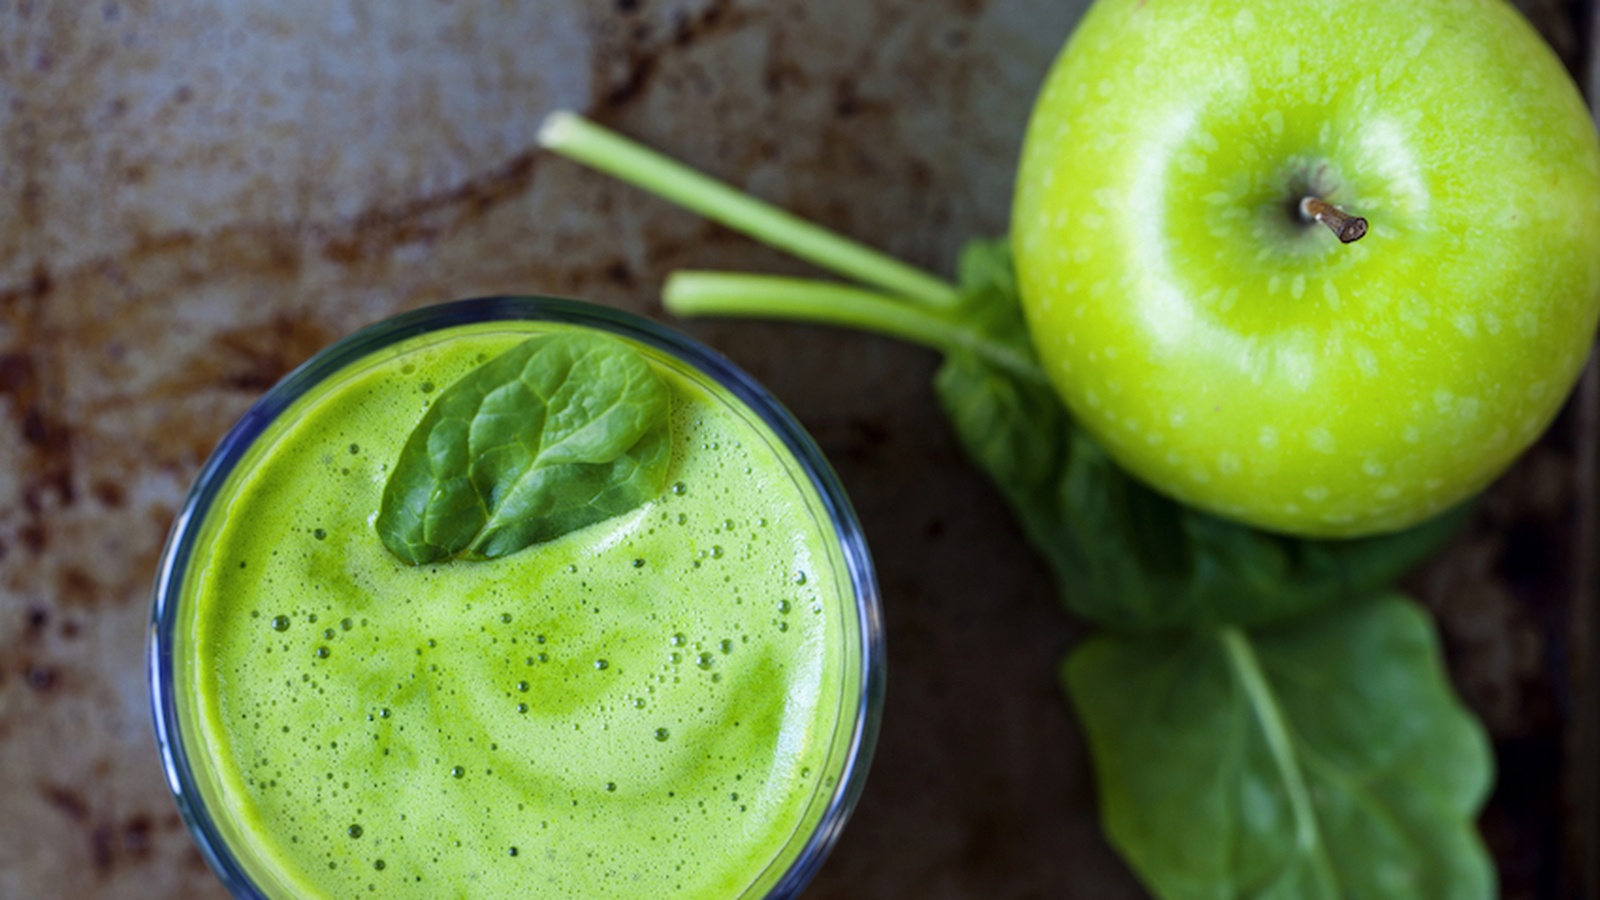 How To Make a Tasty Green Juice